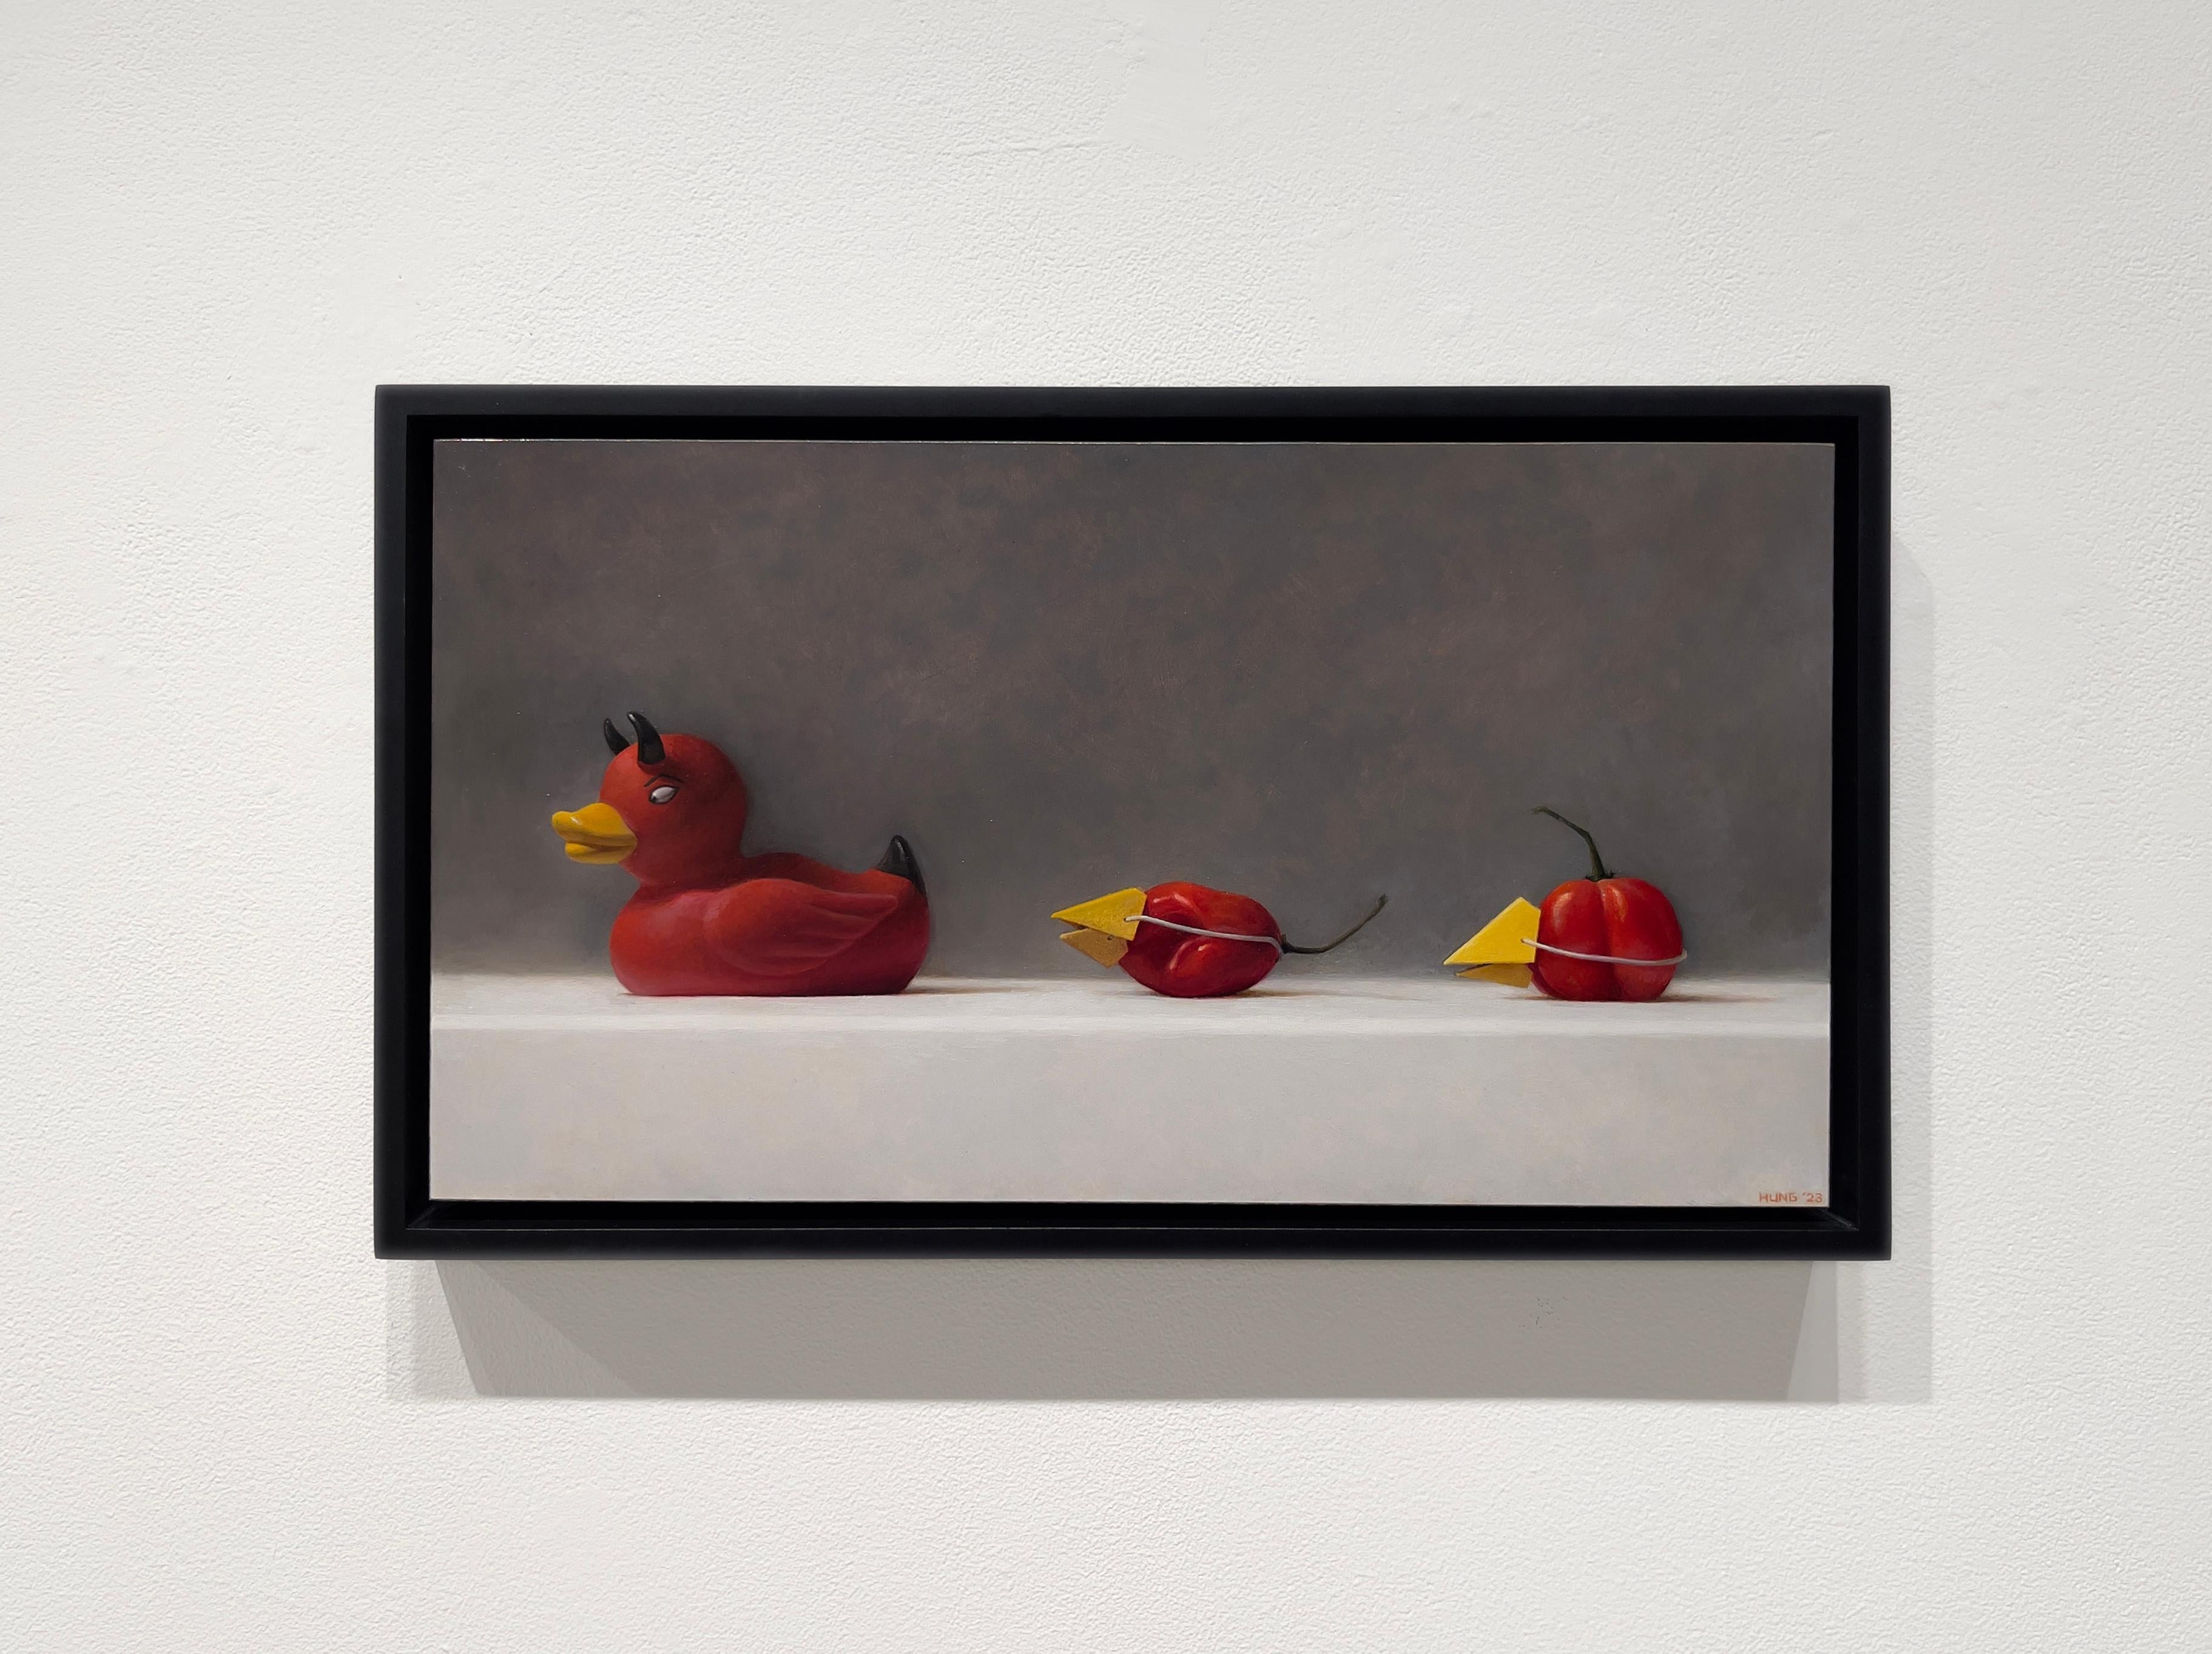 IMPOSTERS #24 (Devil Duck and Habanero Peppers) - Humorous Still Life / Realism  - Painting by Samuel Hung